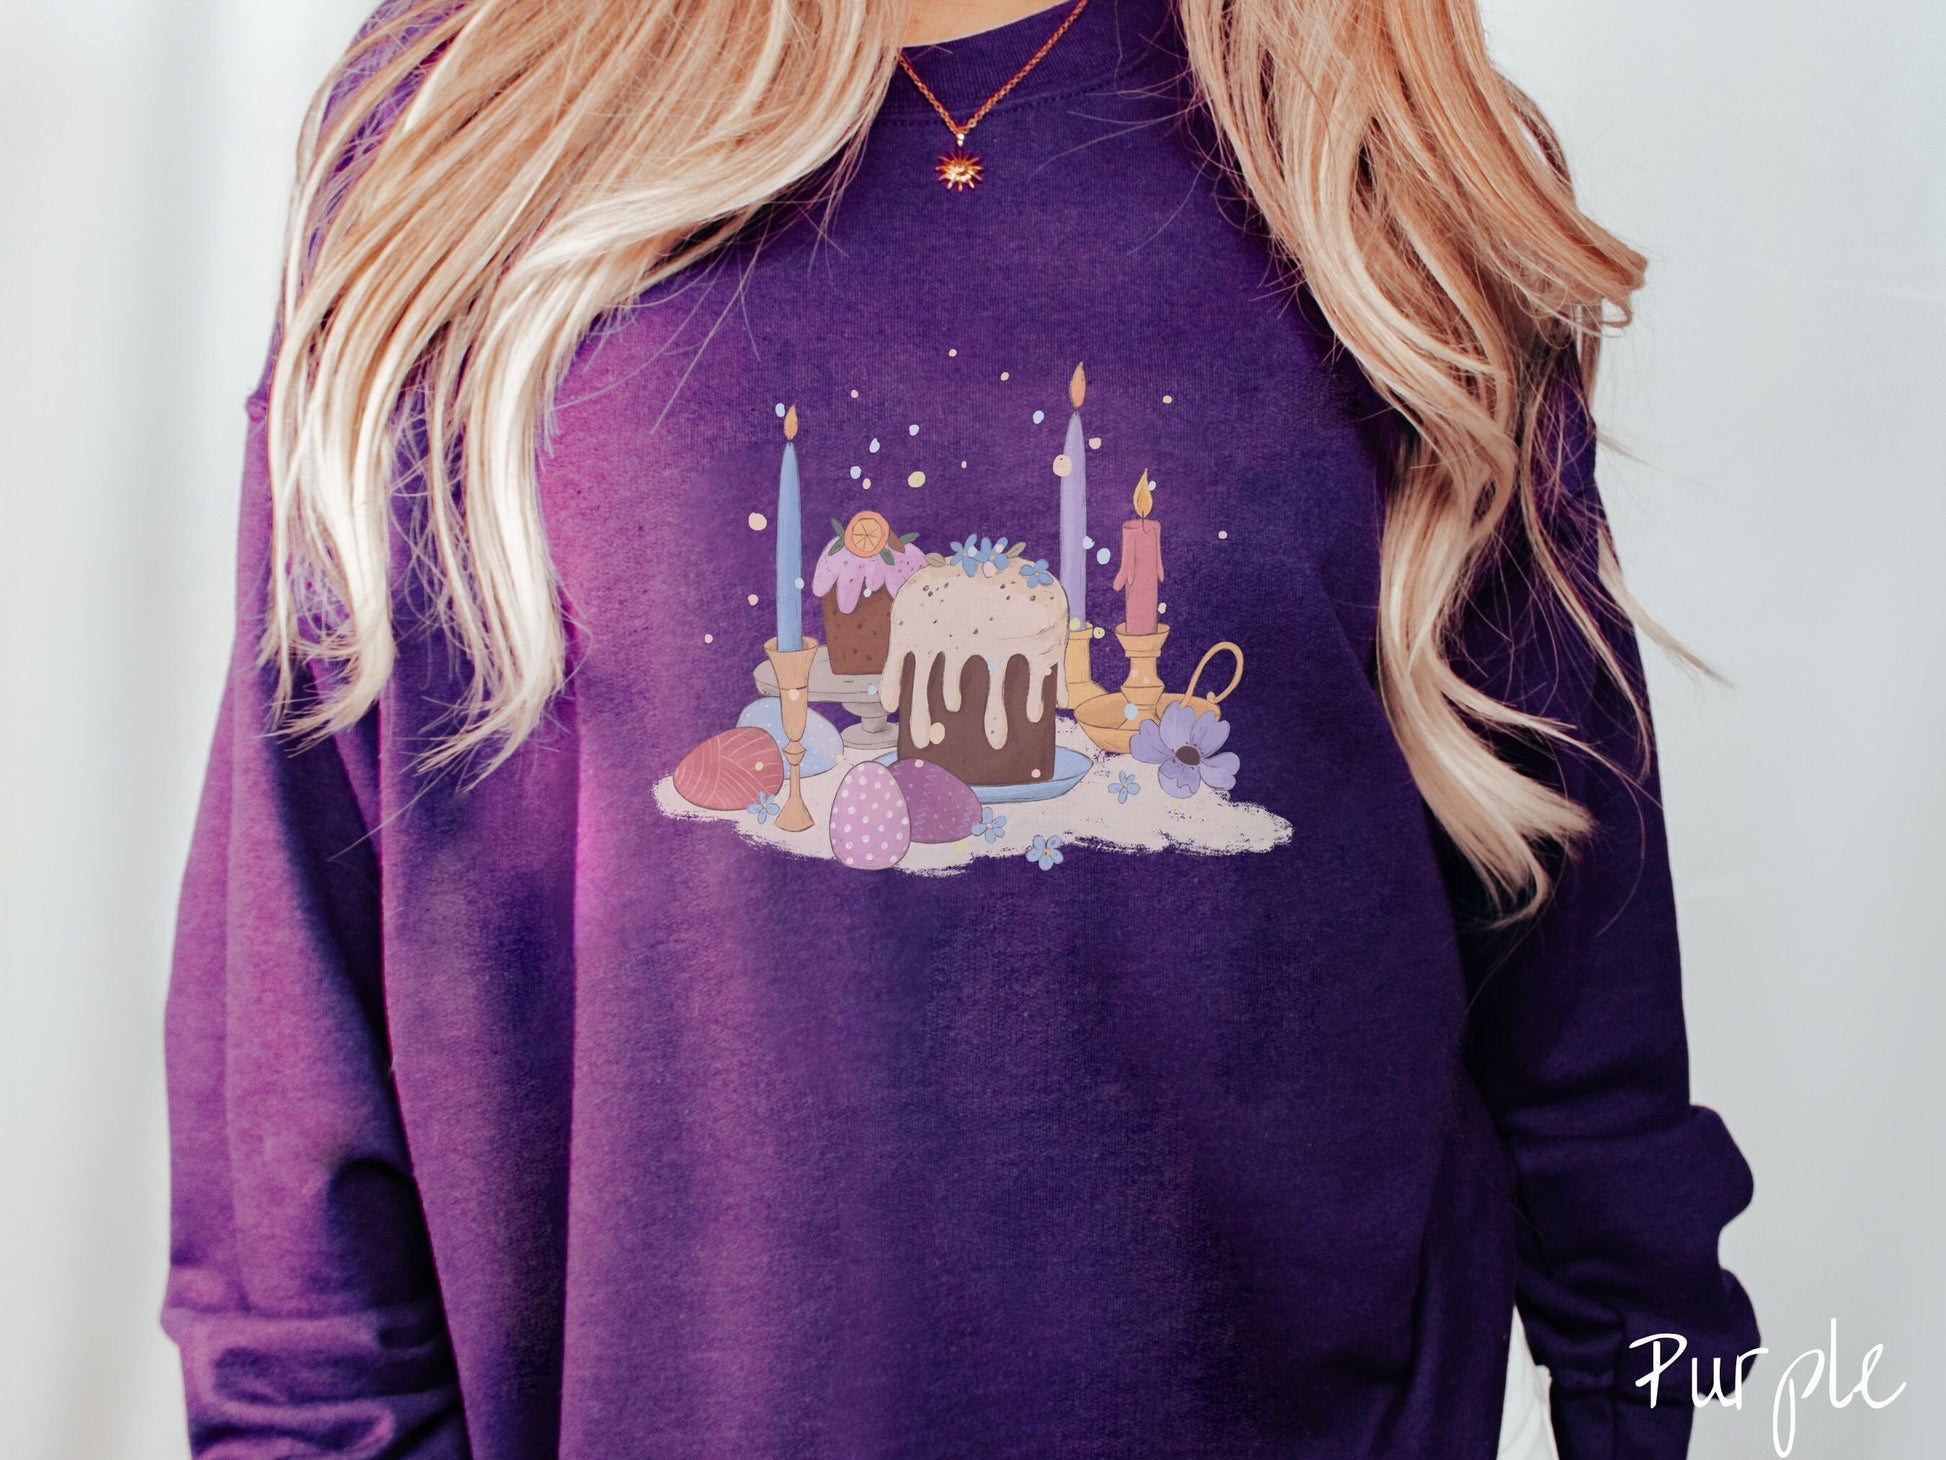 A woman wearing a cute, vintage purple colored sweatshirt with an assortment of colorful candles with wax running down the sides in the center, scattered around the candles are pink, purple, red, and blue colored Easter eggs.